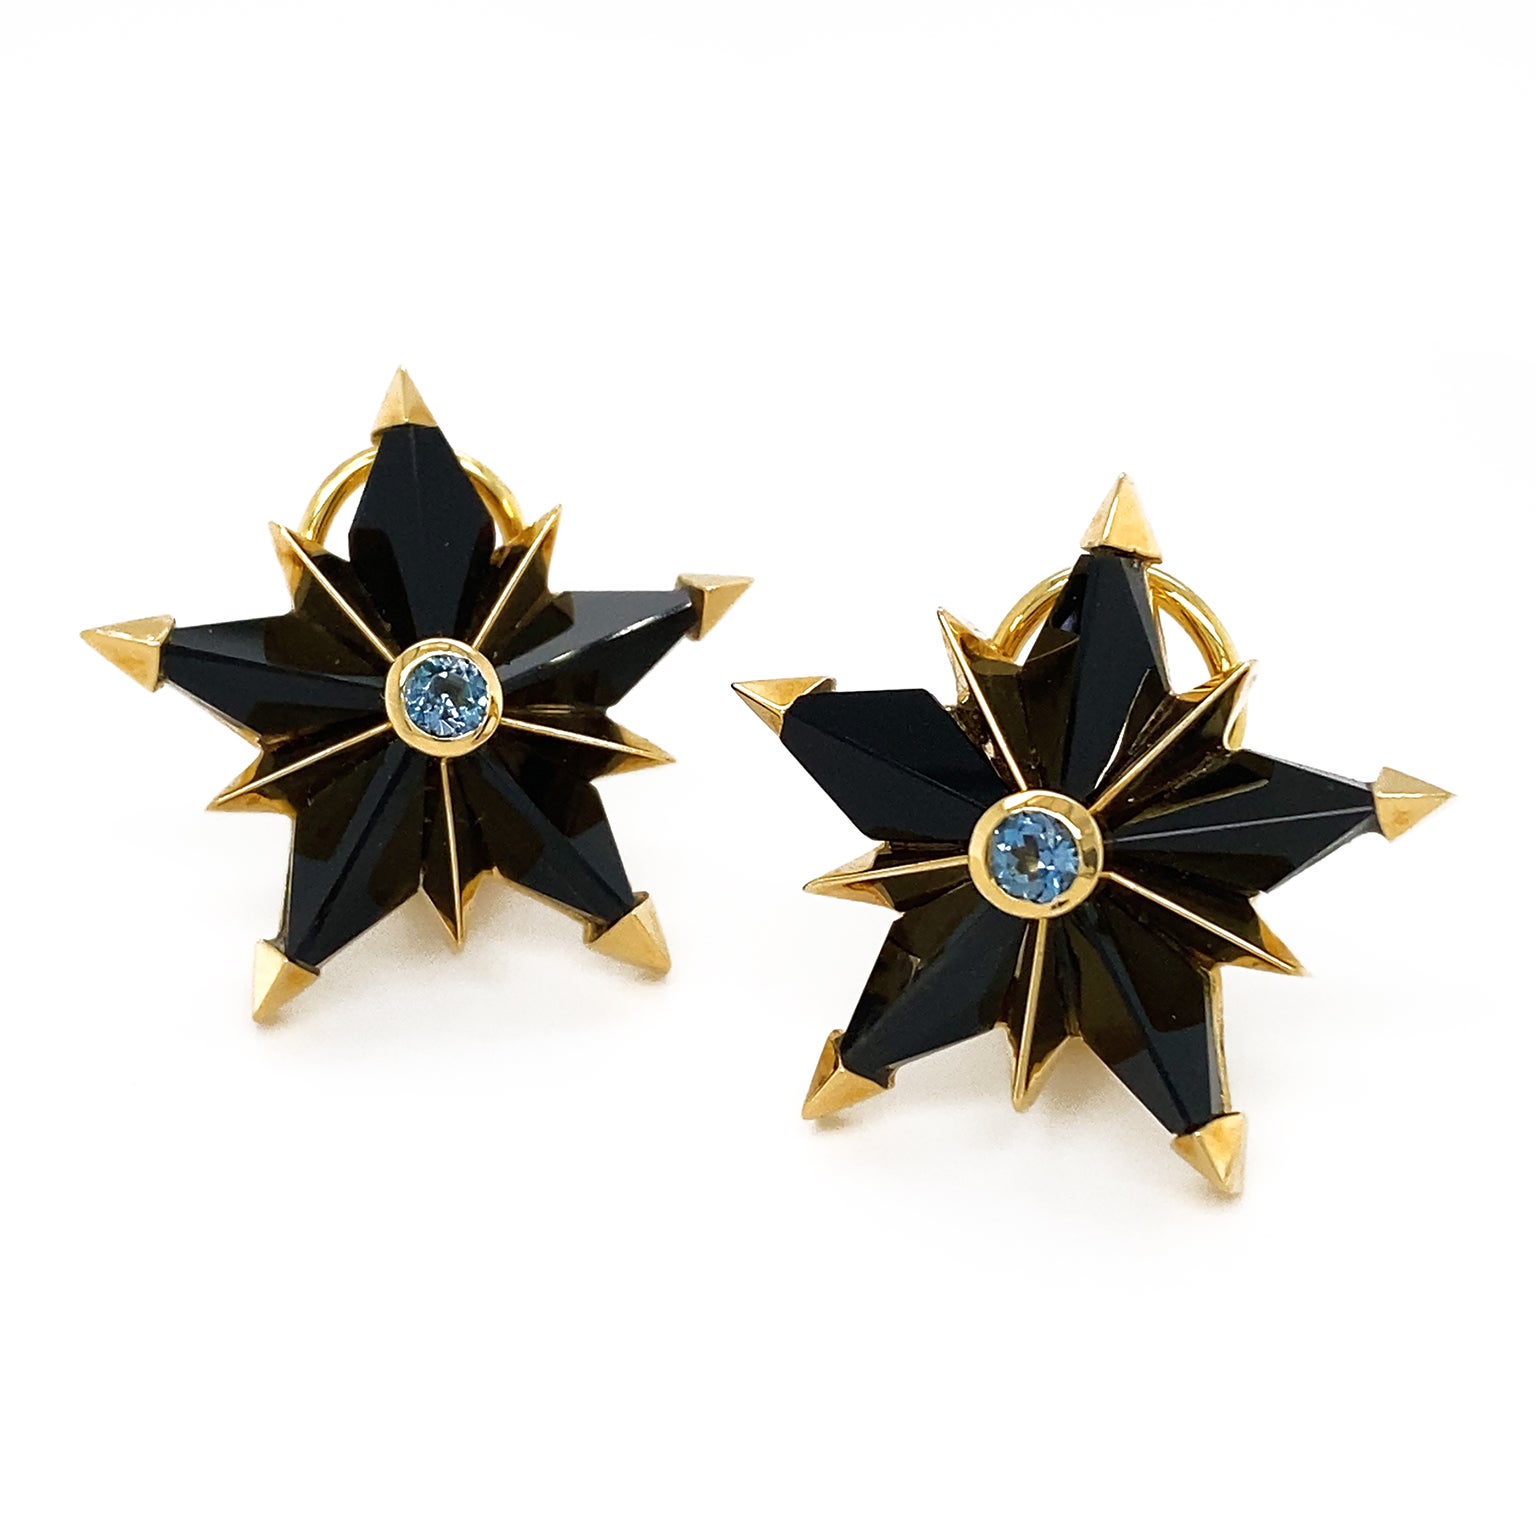 Black jade is the gem of choice cut in a star shape for a bold statement. 18k yellow gold accents the tips of each of the five points, as well as in the center for another five pointed star. In the center is the gleam of an aquamarine for a touch of